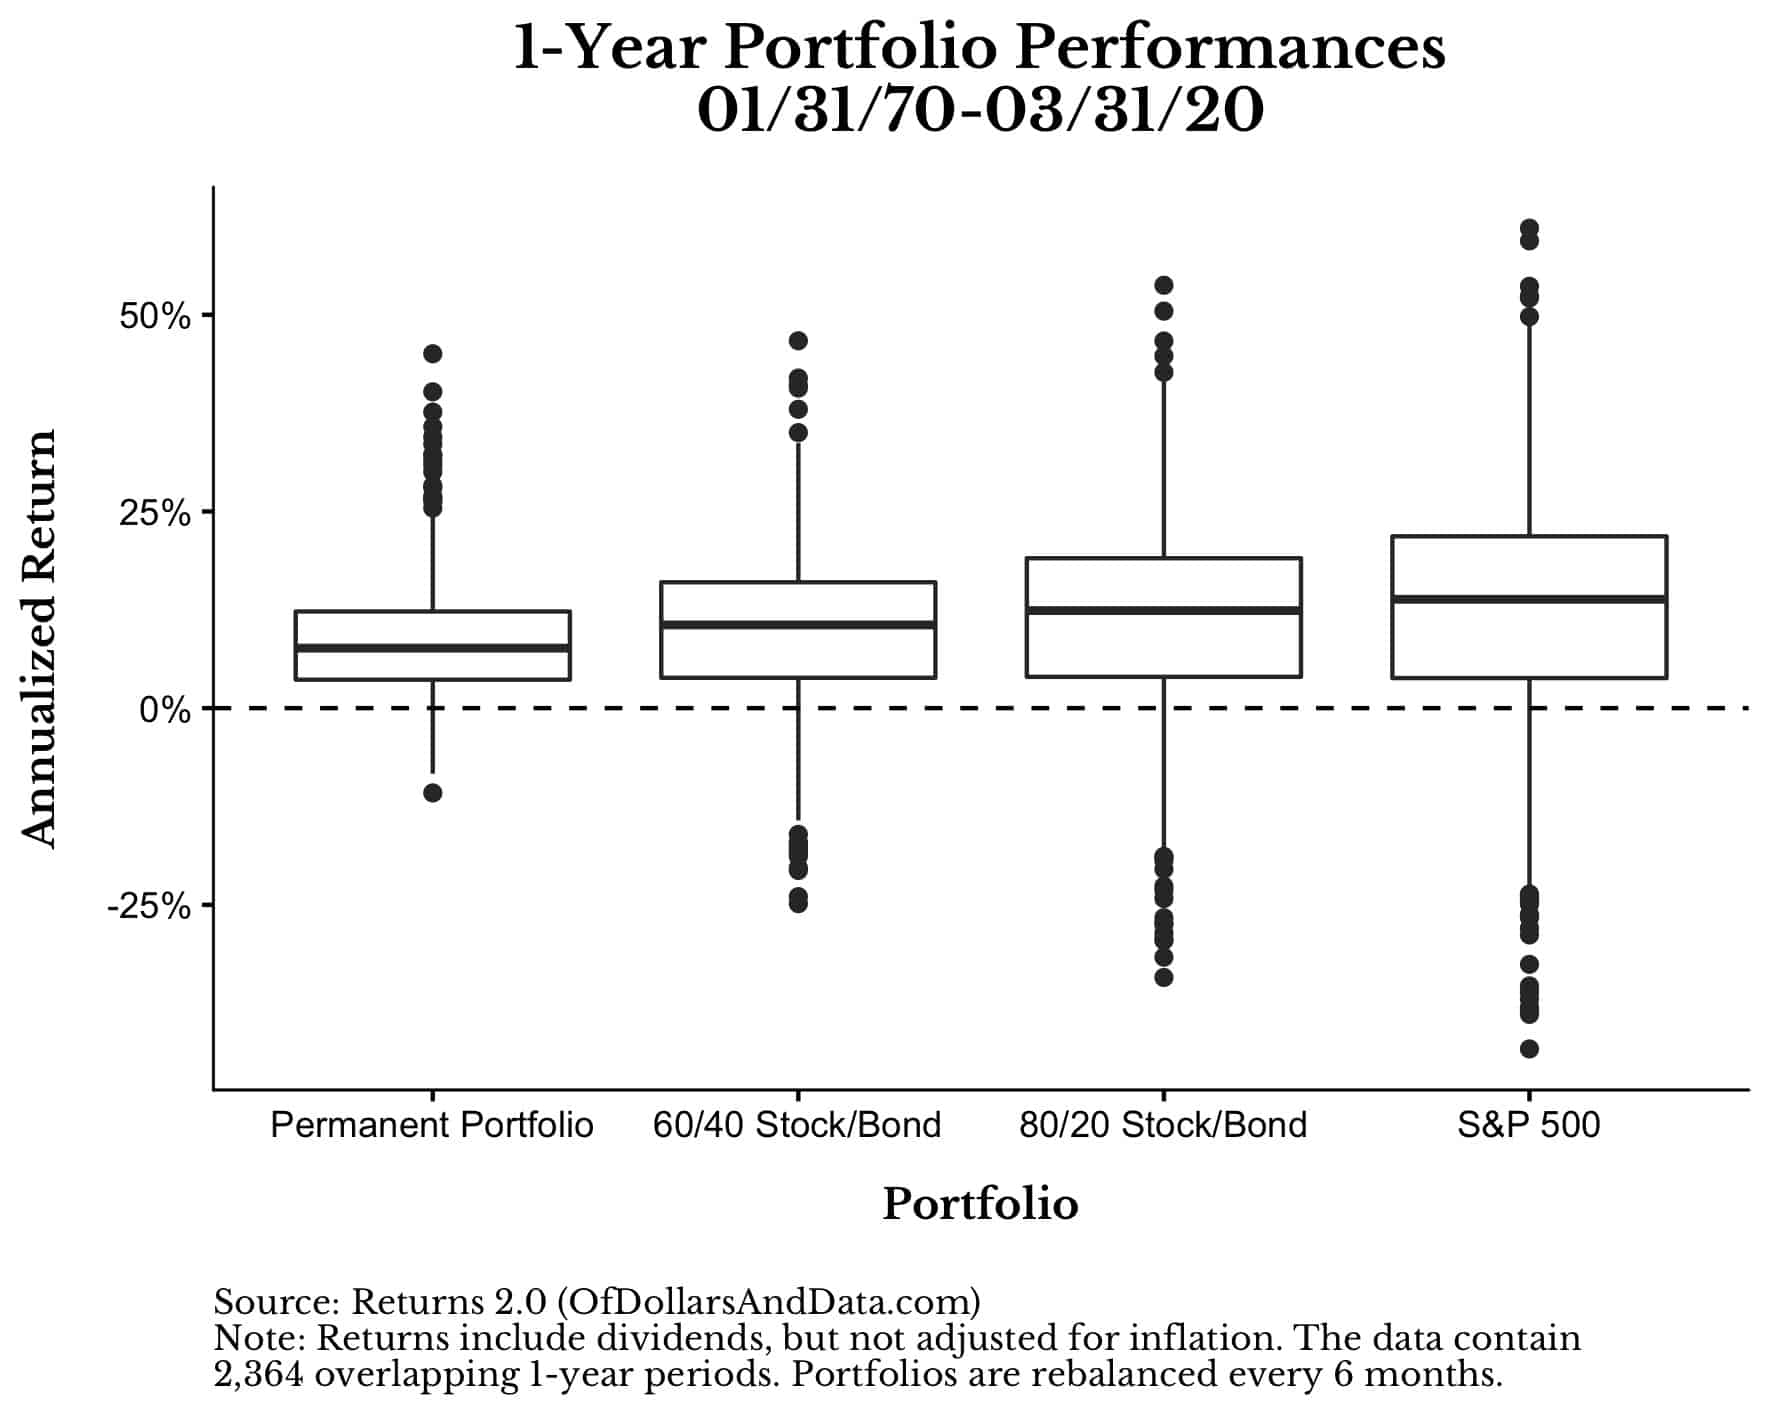 1-Year boxplot of performance for the Permanent Portfolio, 60/40, 80/20, and the S&P 500 from 1970 to 2020